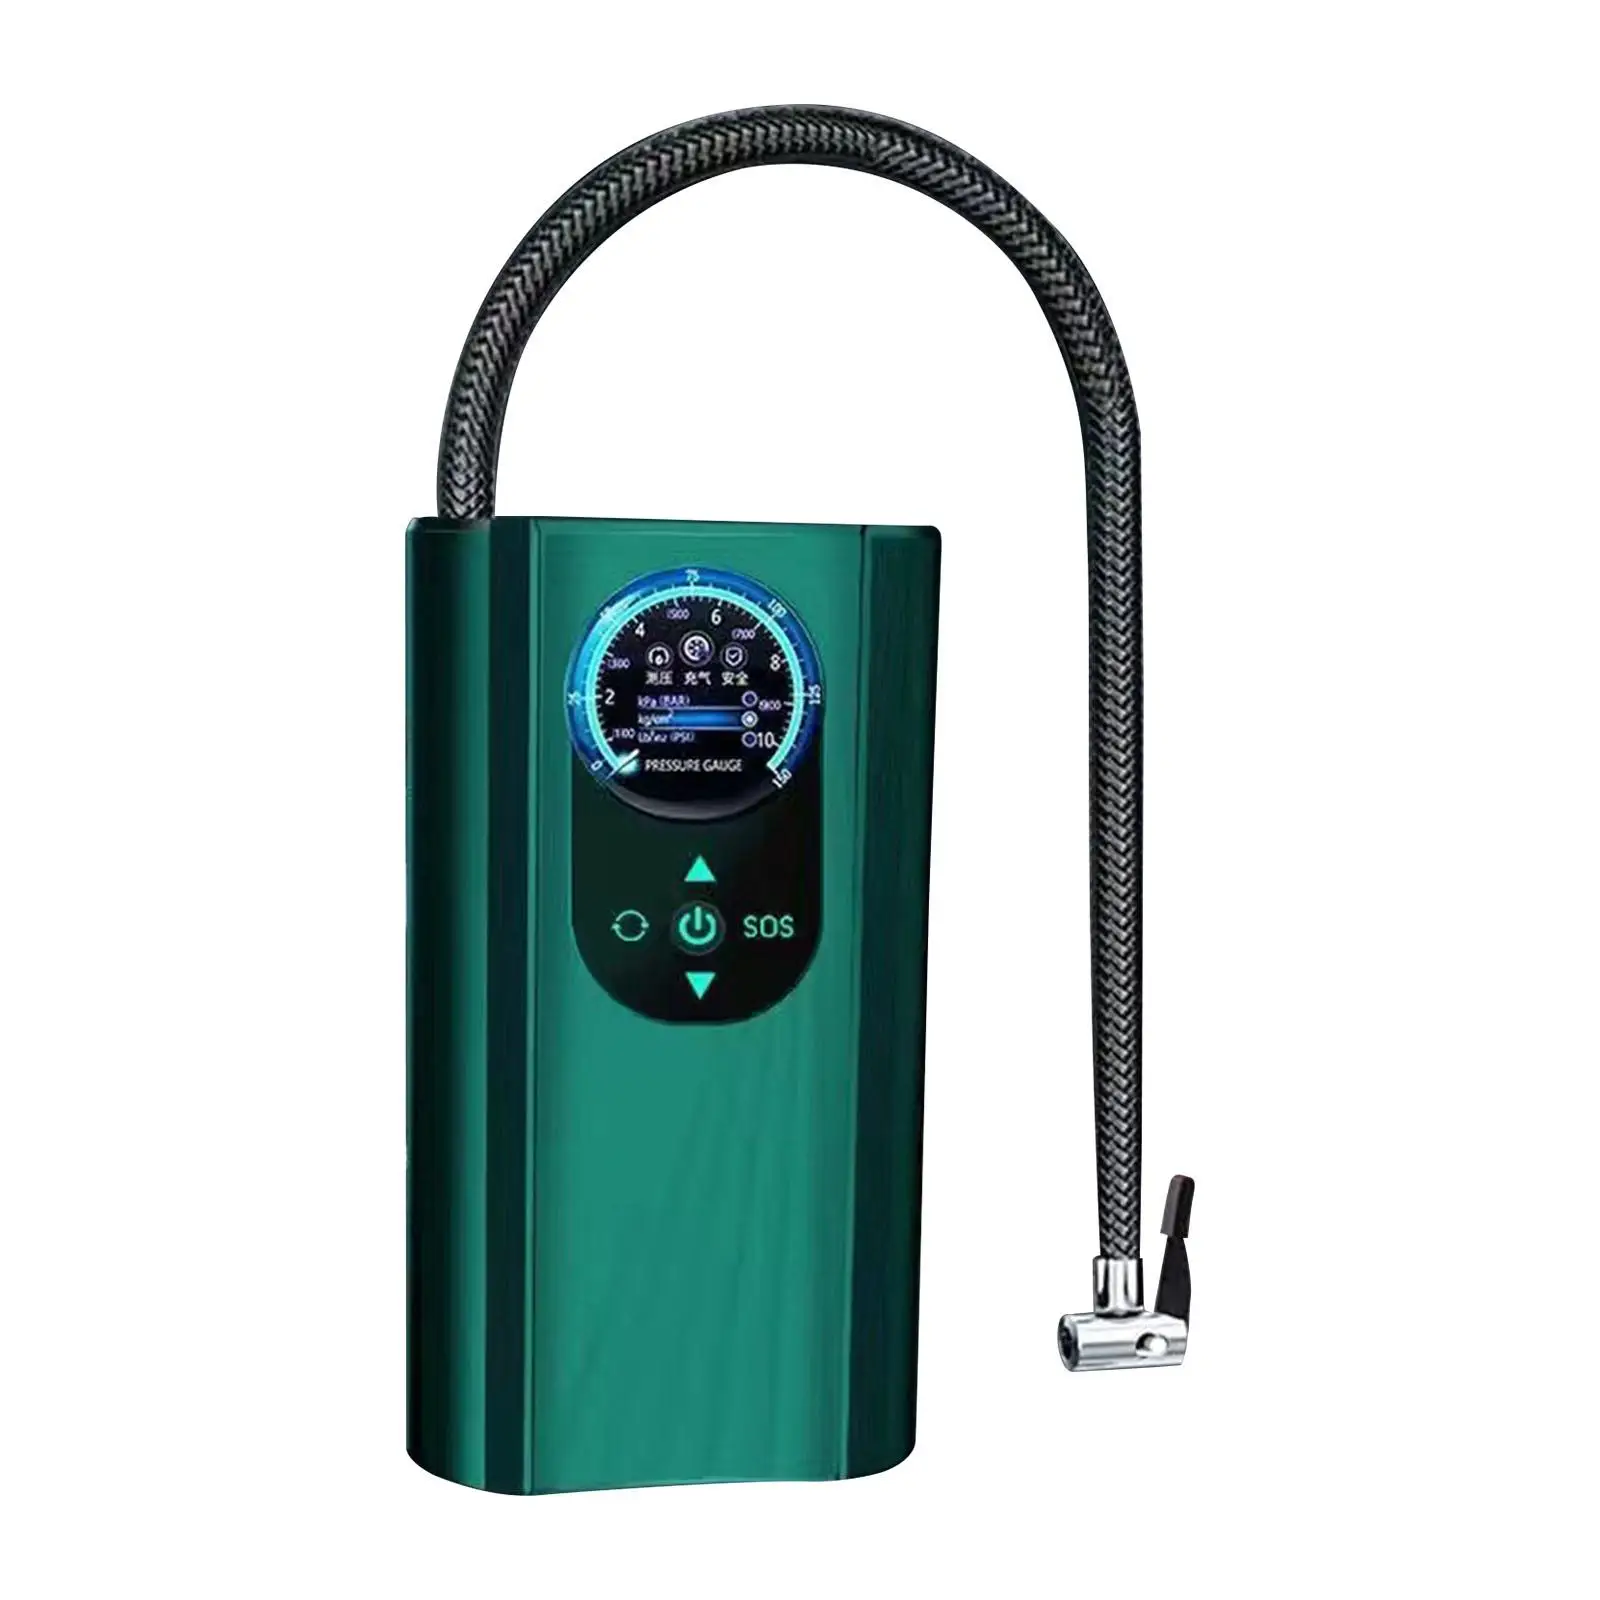 Portable Air Compressor Handheld Fast with Pressure Gauge Bike Pump Electric Tire Pump for Bicycle Ball SUV Car Basketball